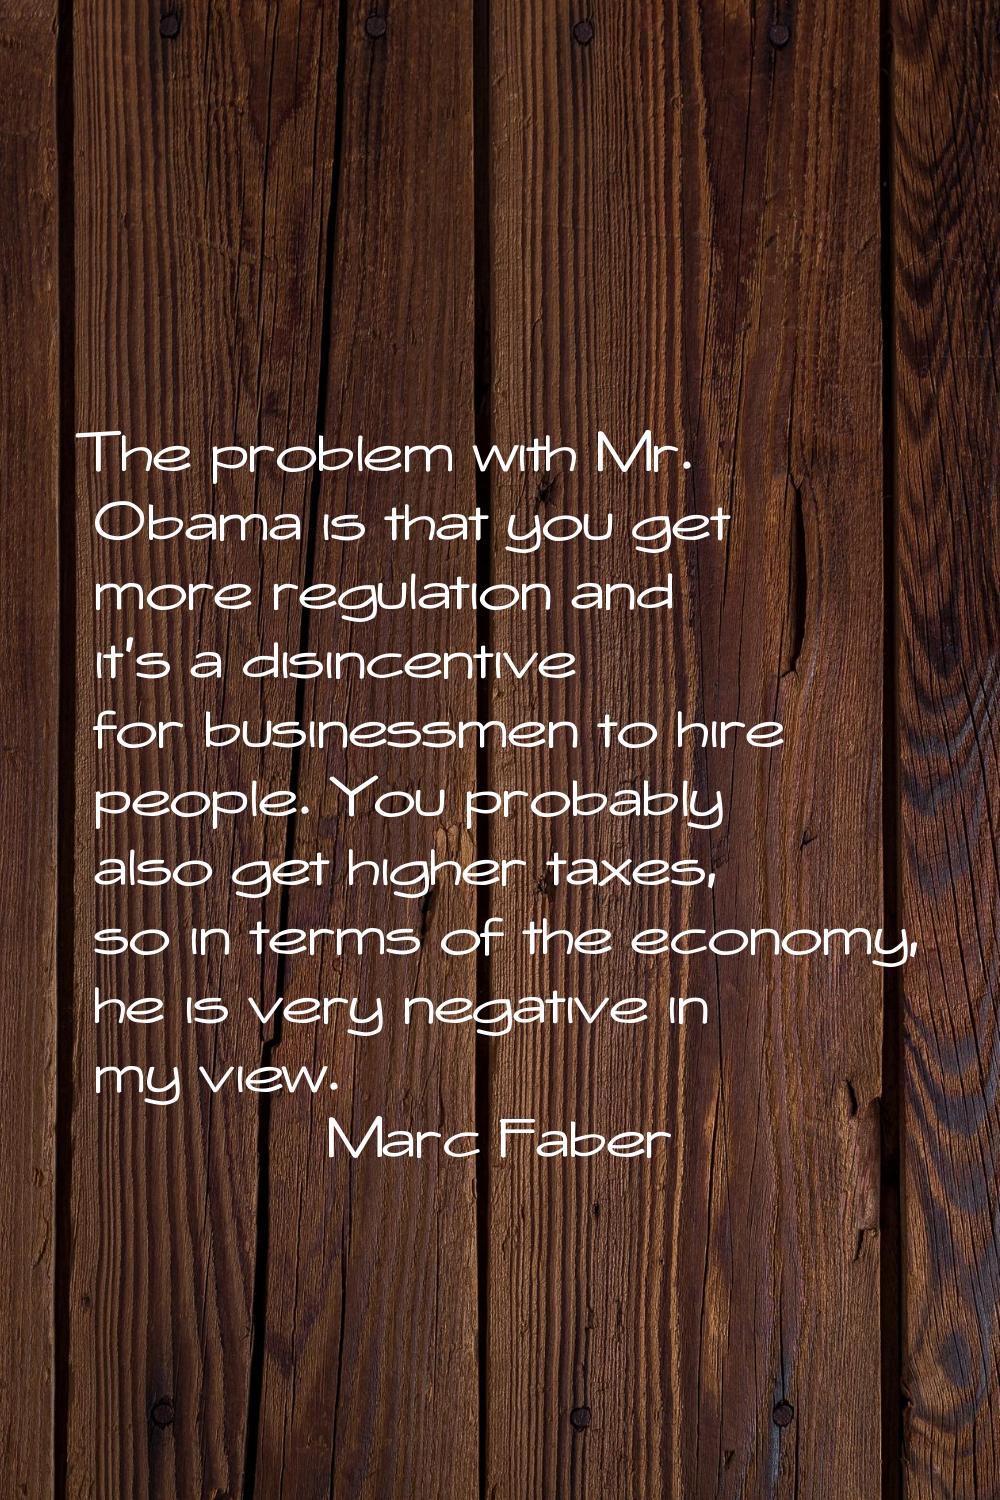 The problem with Mr. Obama is that you get more regulation and it's a disincentive for businessmen 